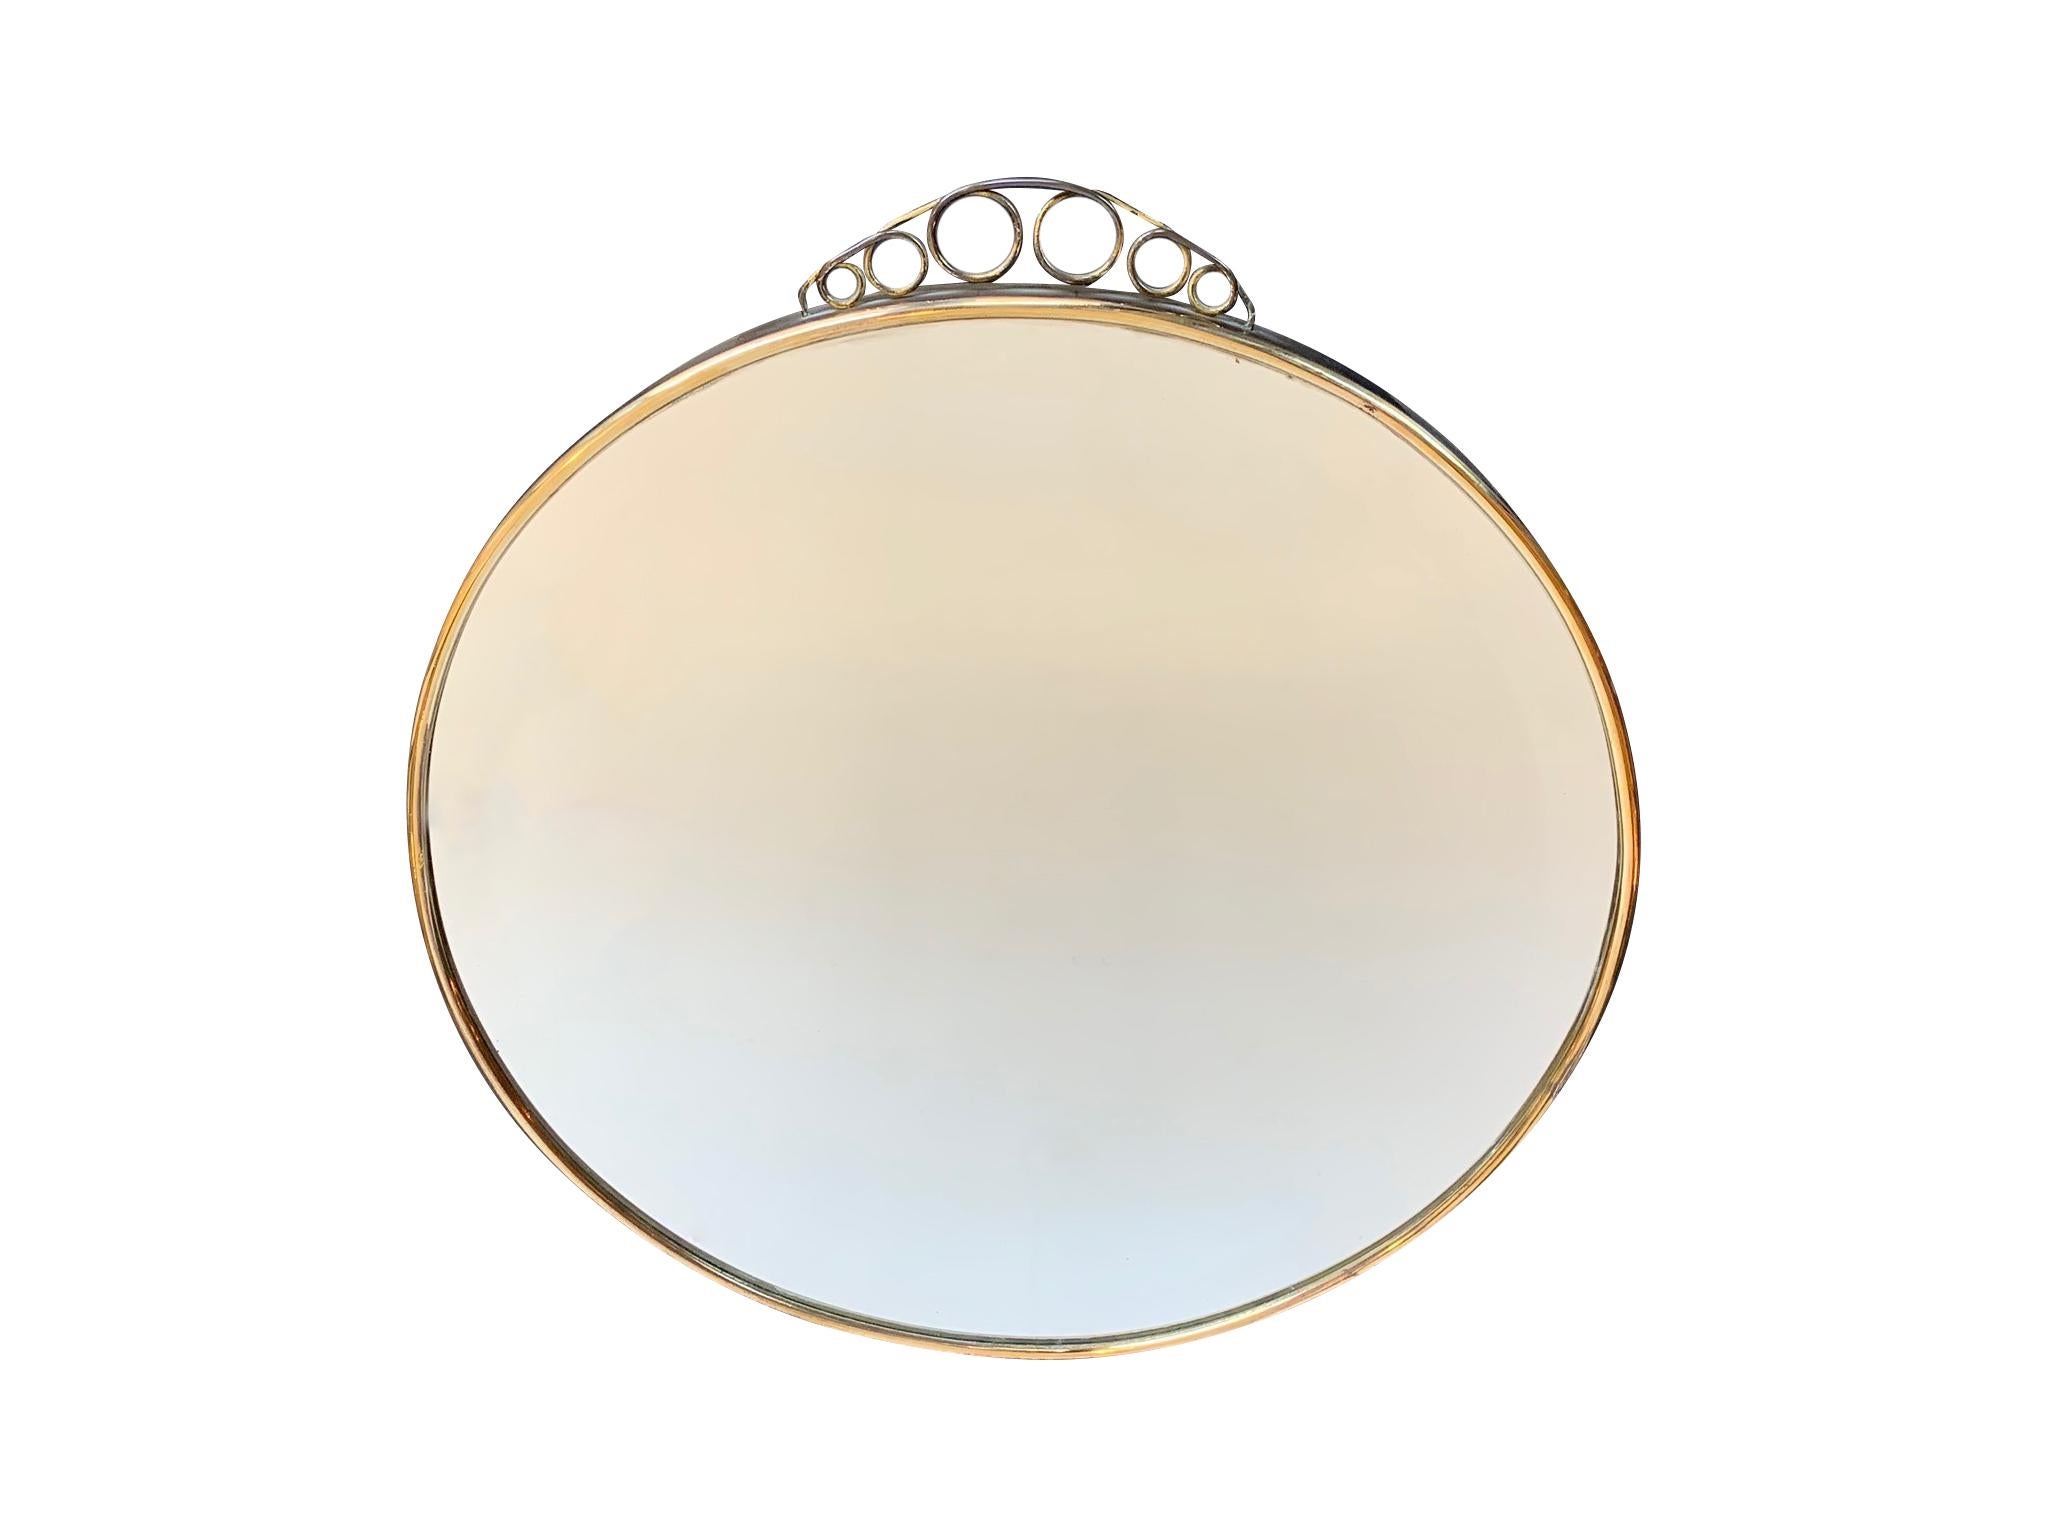 A 1950s Italian circular mirror with beveled glass with a brass frame and top scrolling detail.